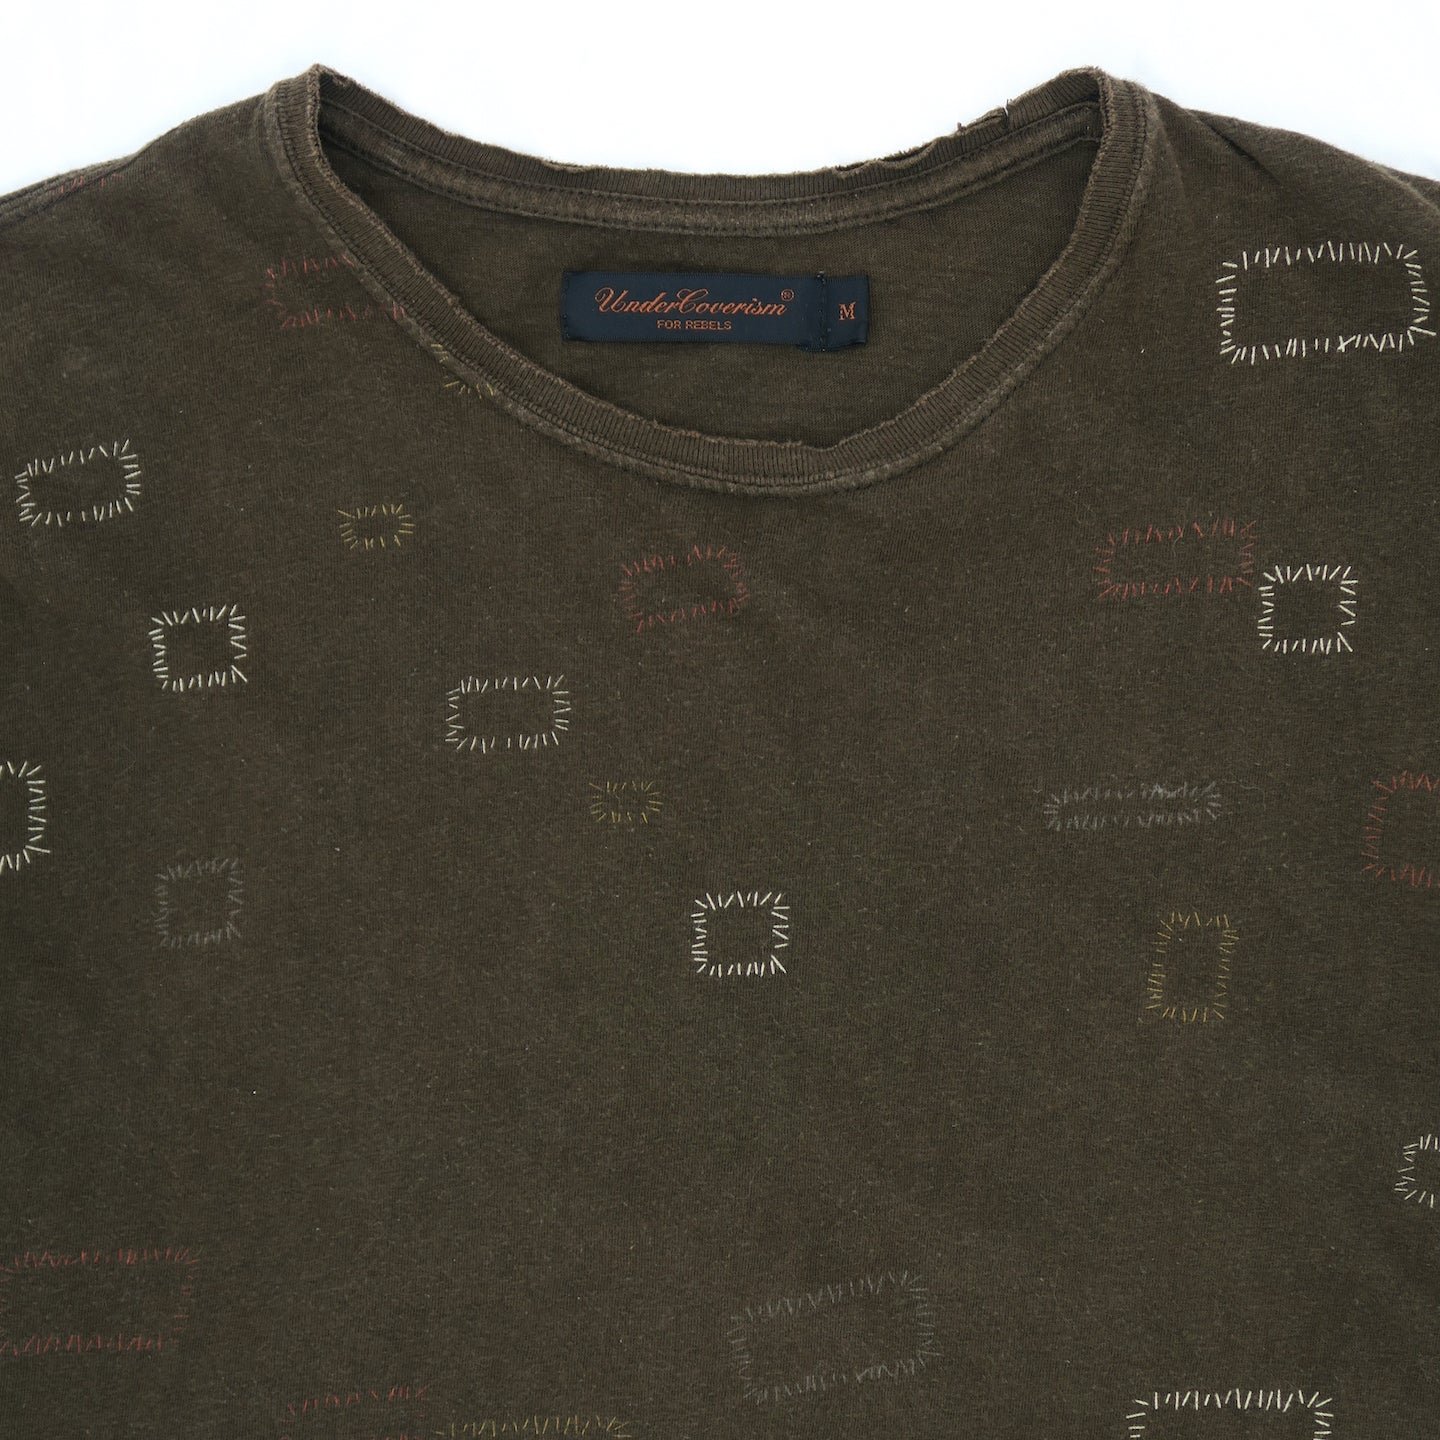 Undercover SS2003 'Scab' Patchwork Printed T-Shirt — DENIMGLASSES